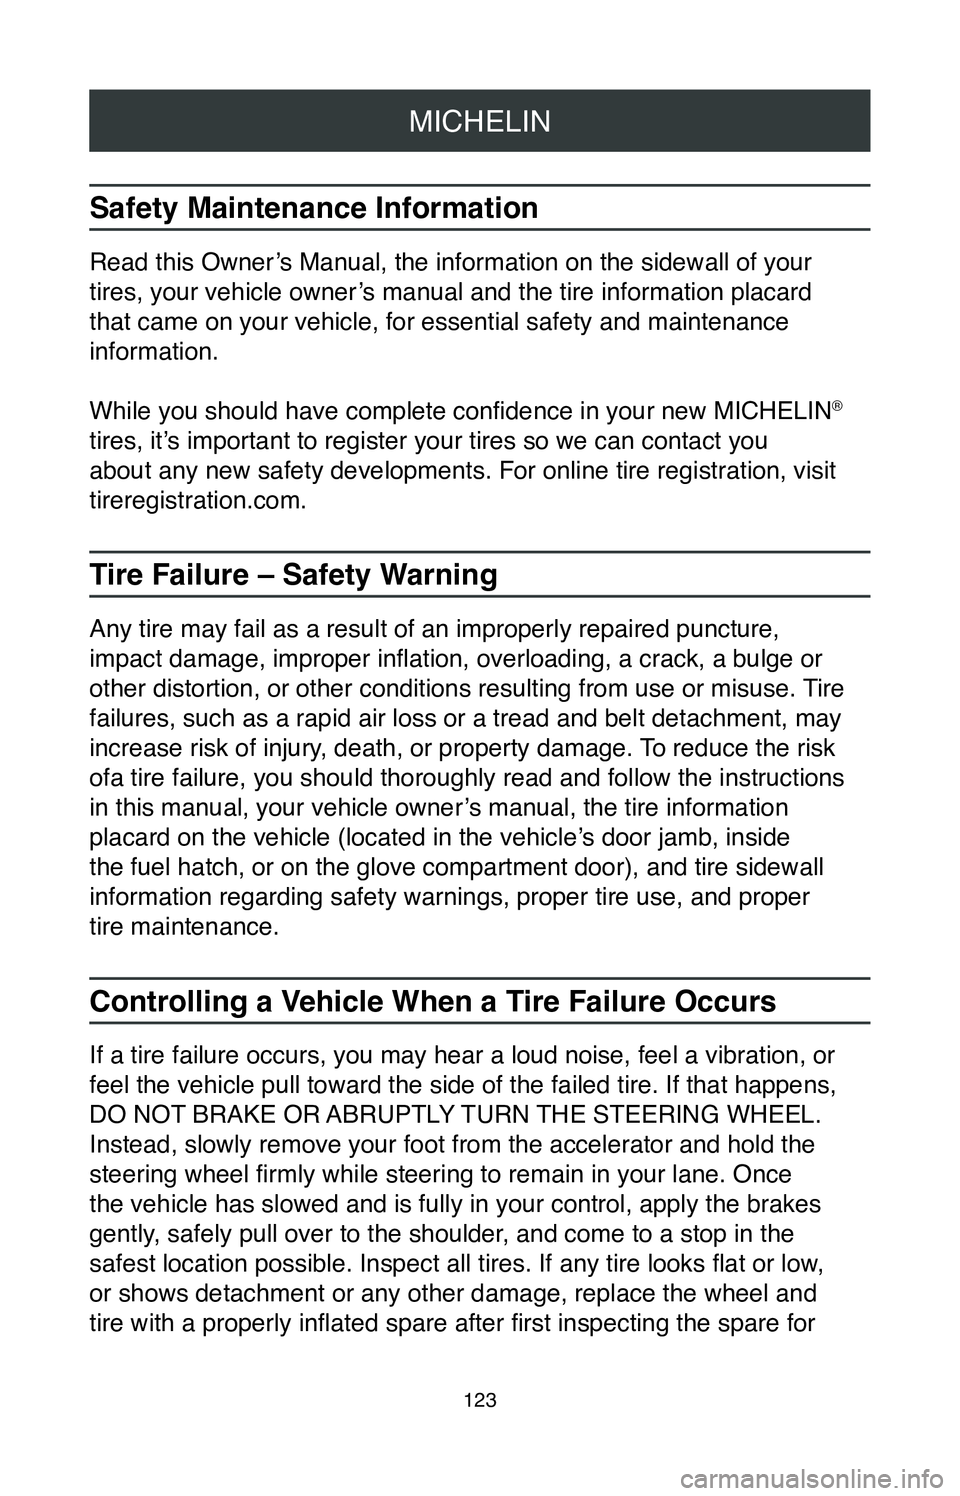 TOYOTA TUNDRA 2020  Warranties & Maintenance Guides (in English) MICHELIN
123
Safety Maintenance Information
Read this Owner’s Manual, the information on the sidewall of your 
tires, your vehicle owner’s manual and the tire information placard 
that came on you